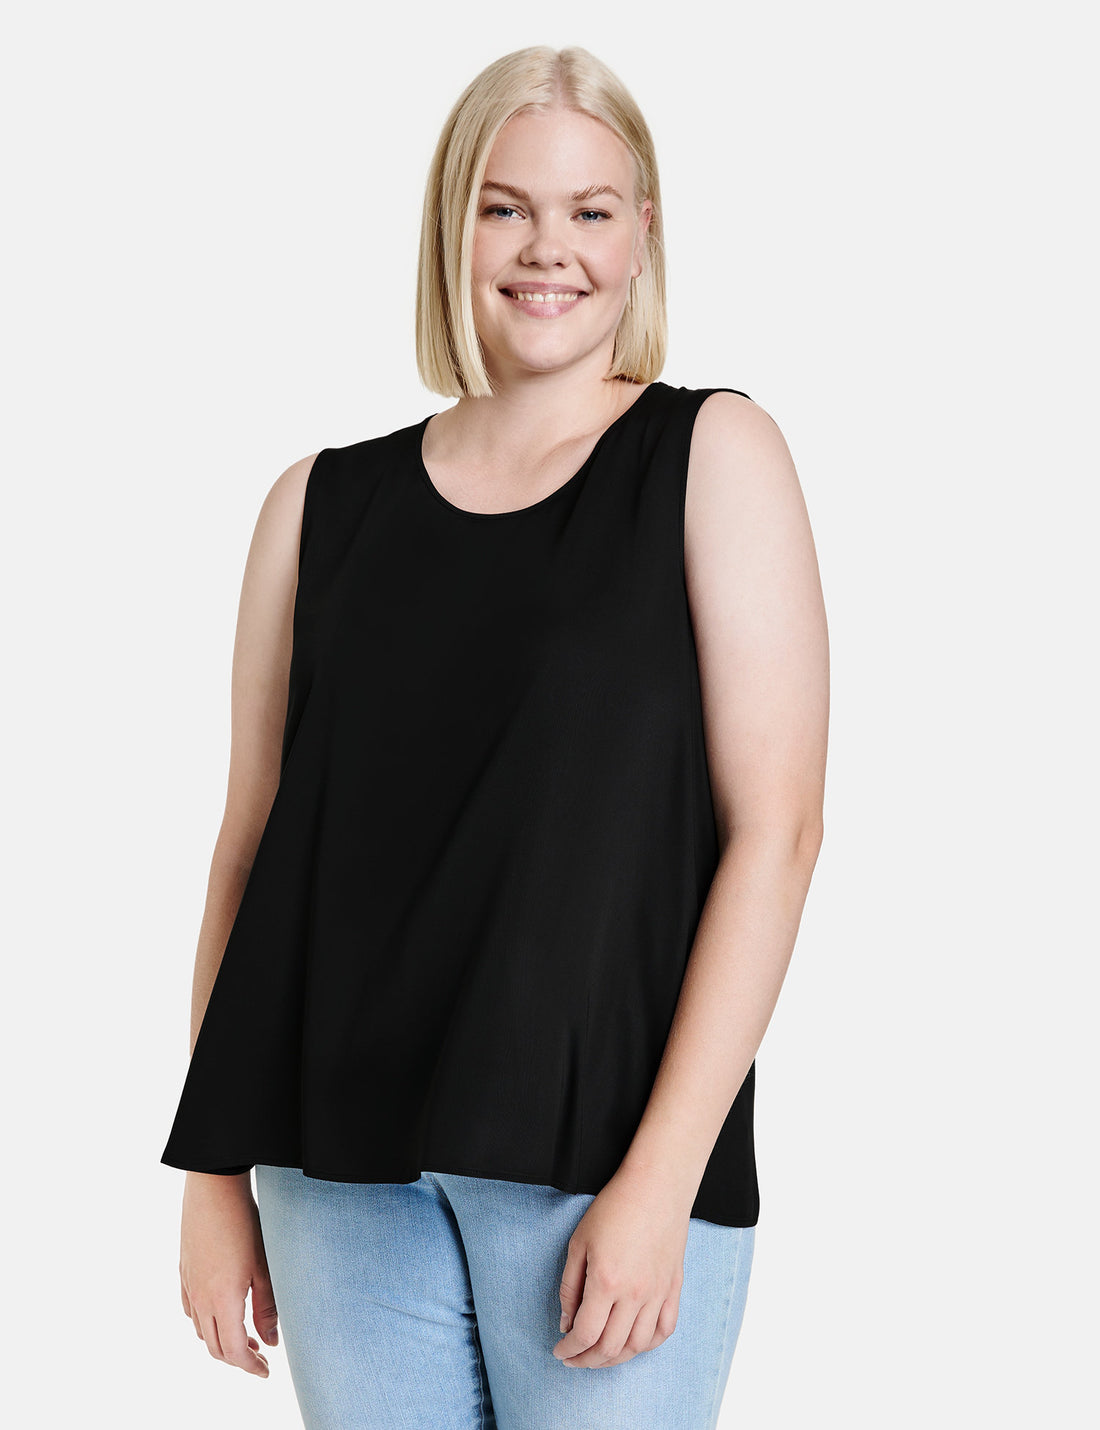 Blouse Top With Side Slits_960994-29141_1100_01